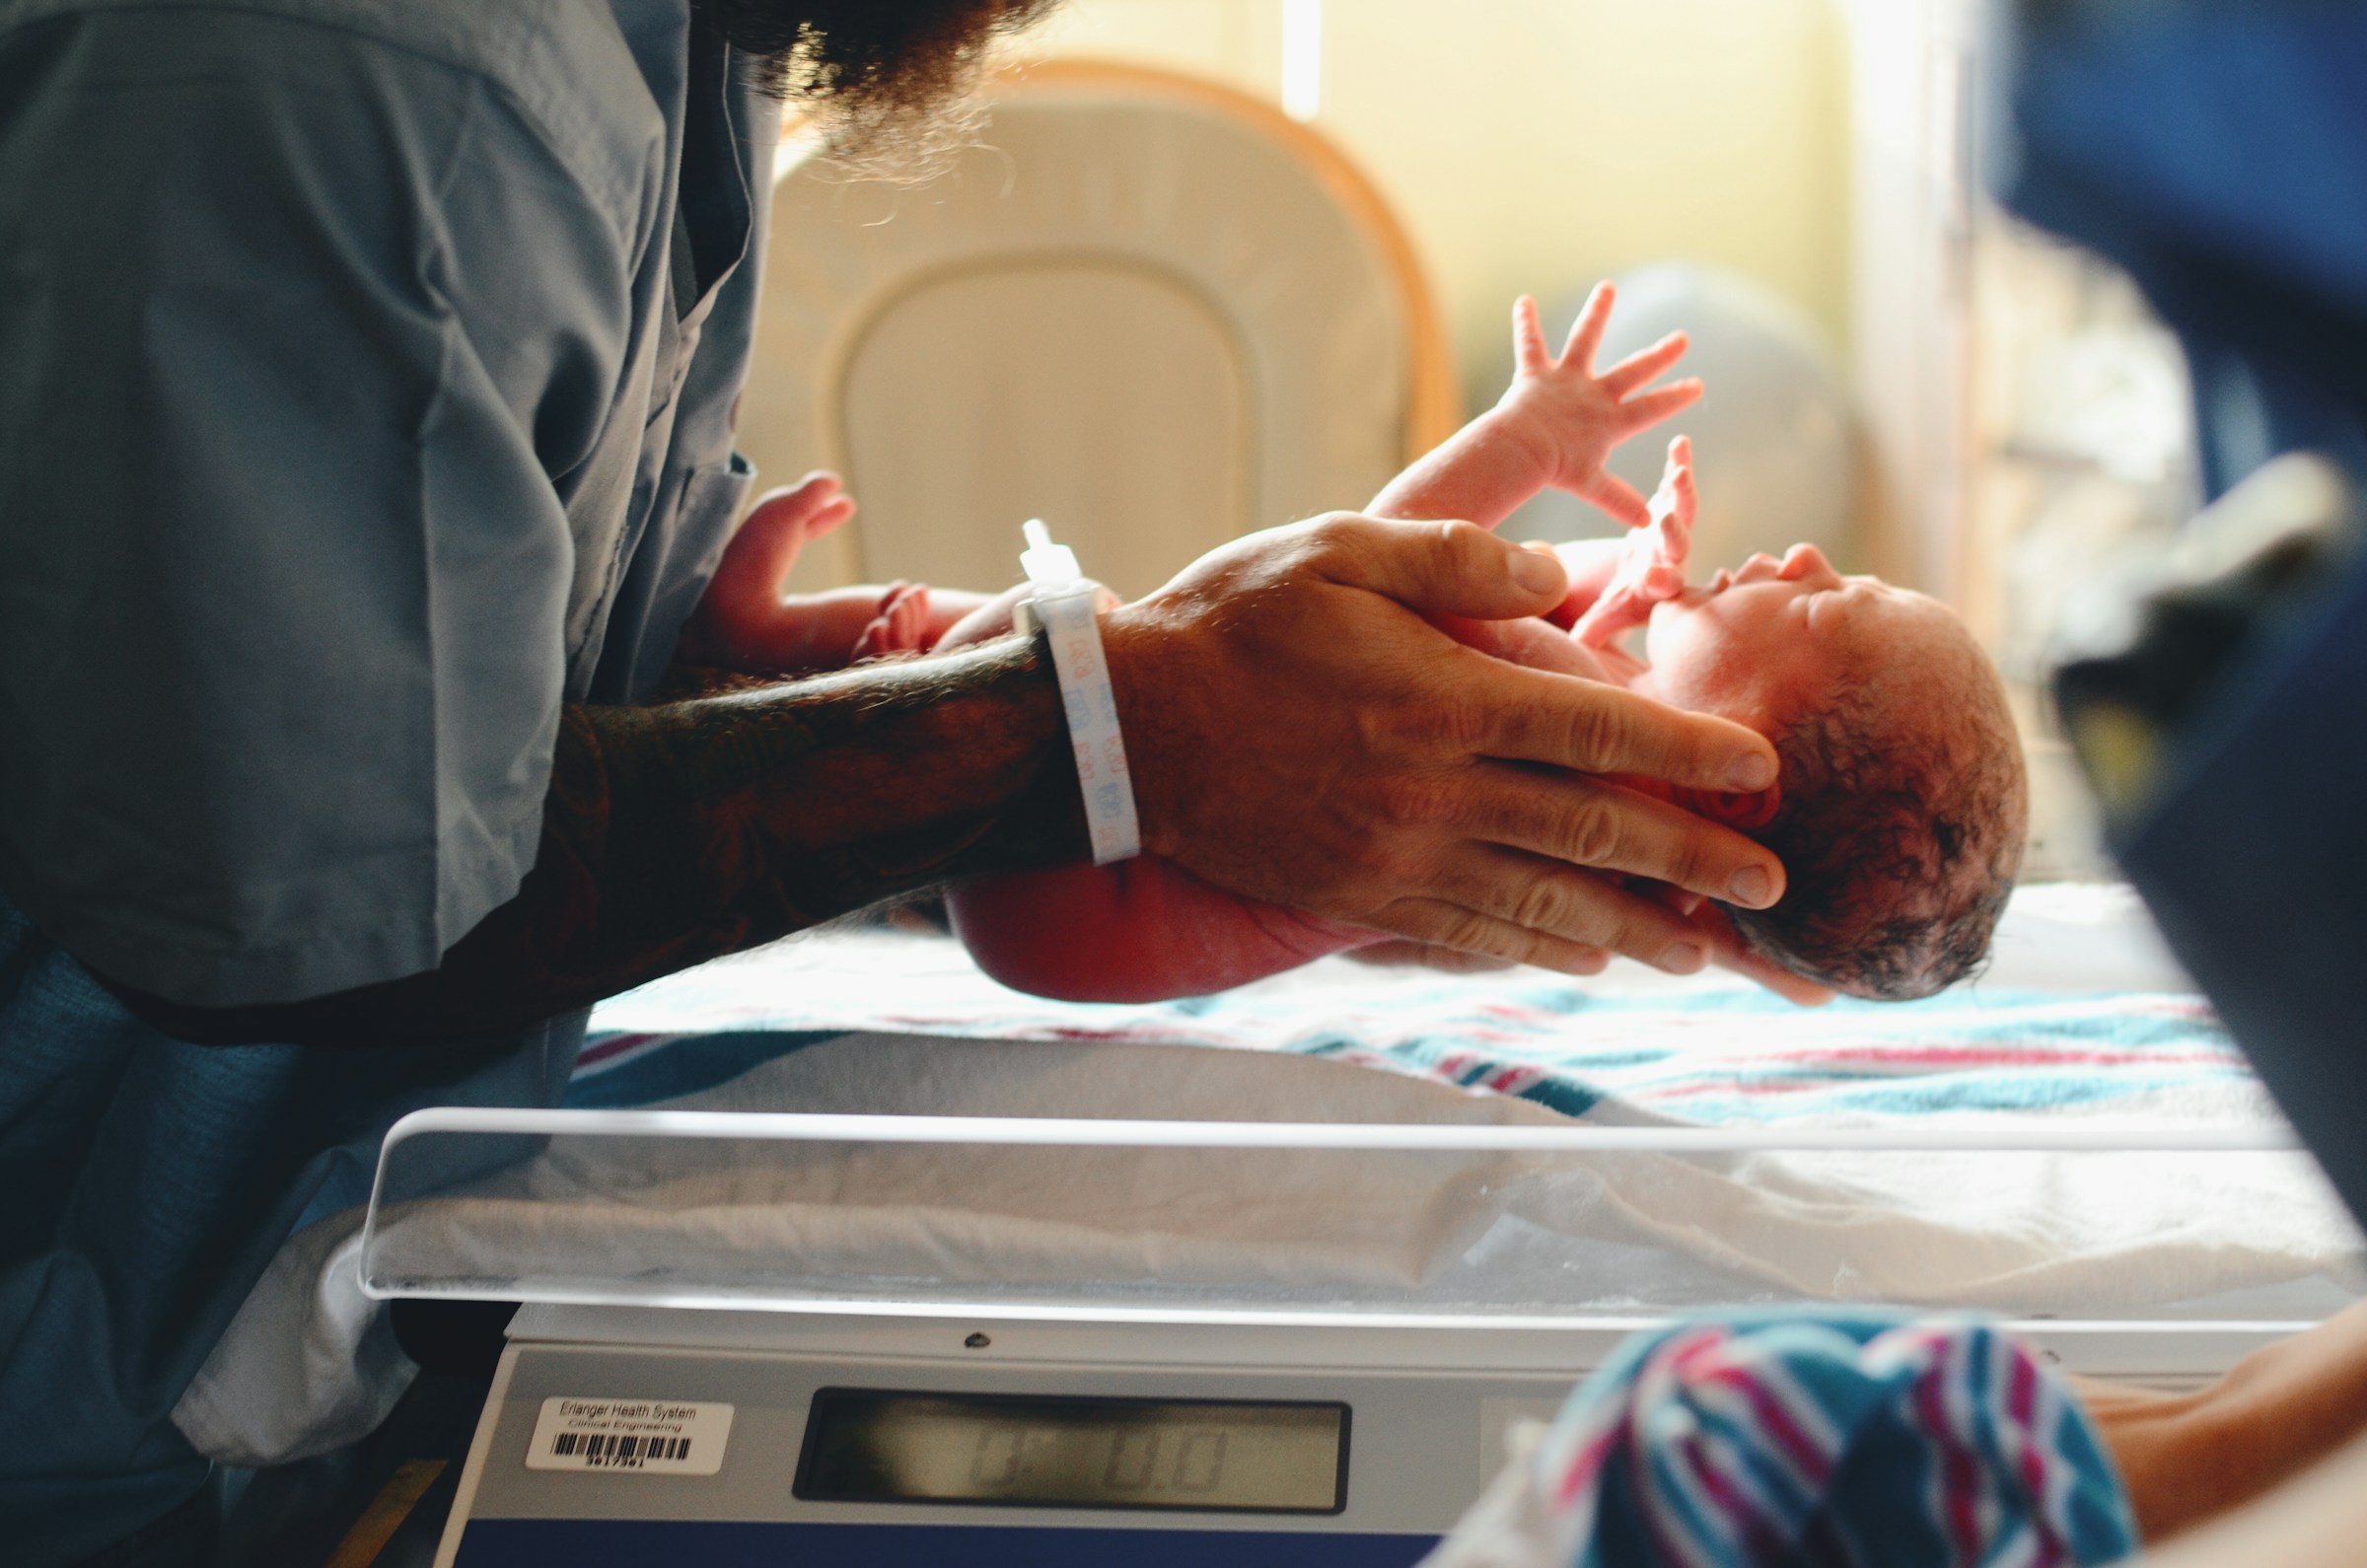 A doctor putting a newborn baby on scales | Source: Unsplash